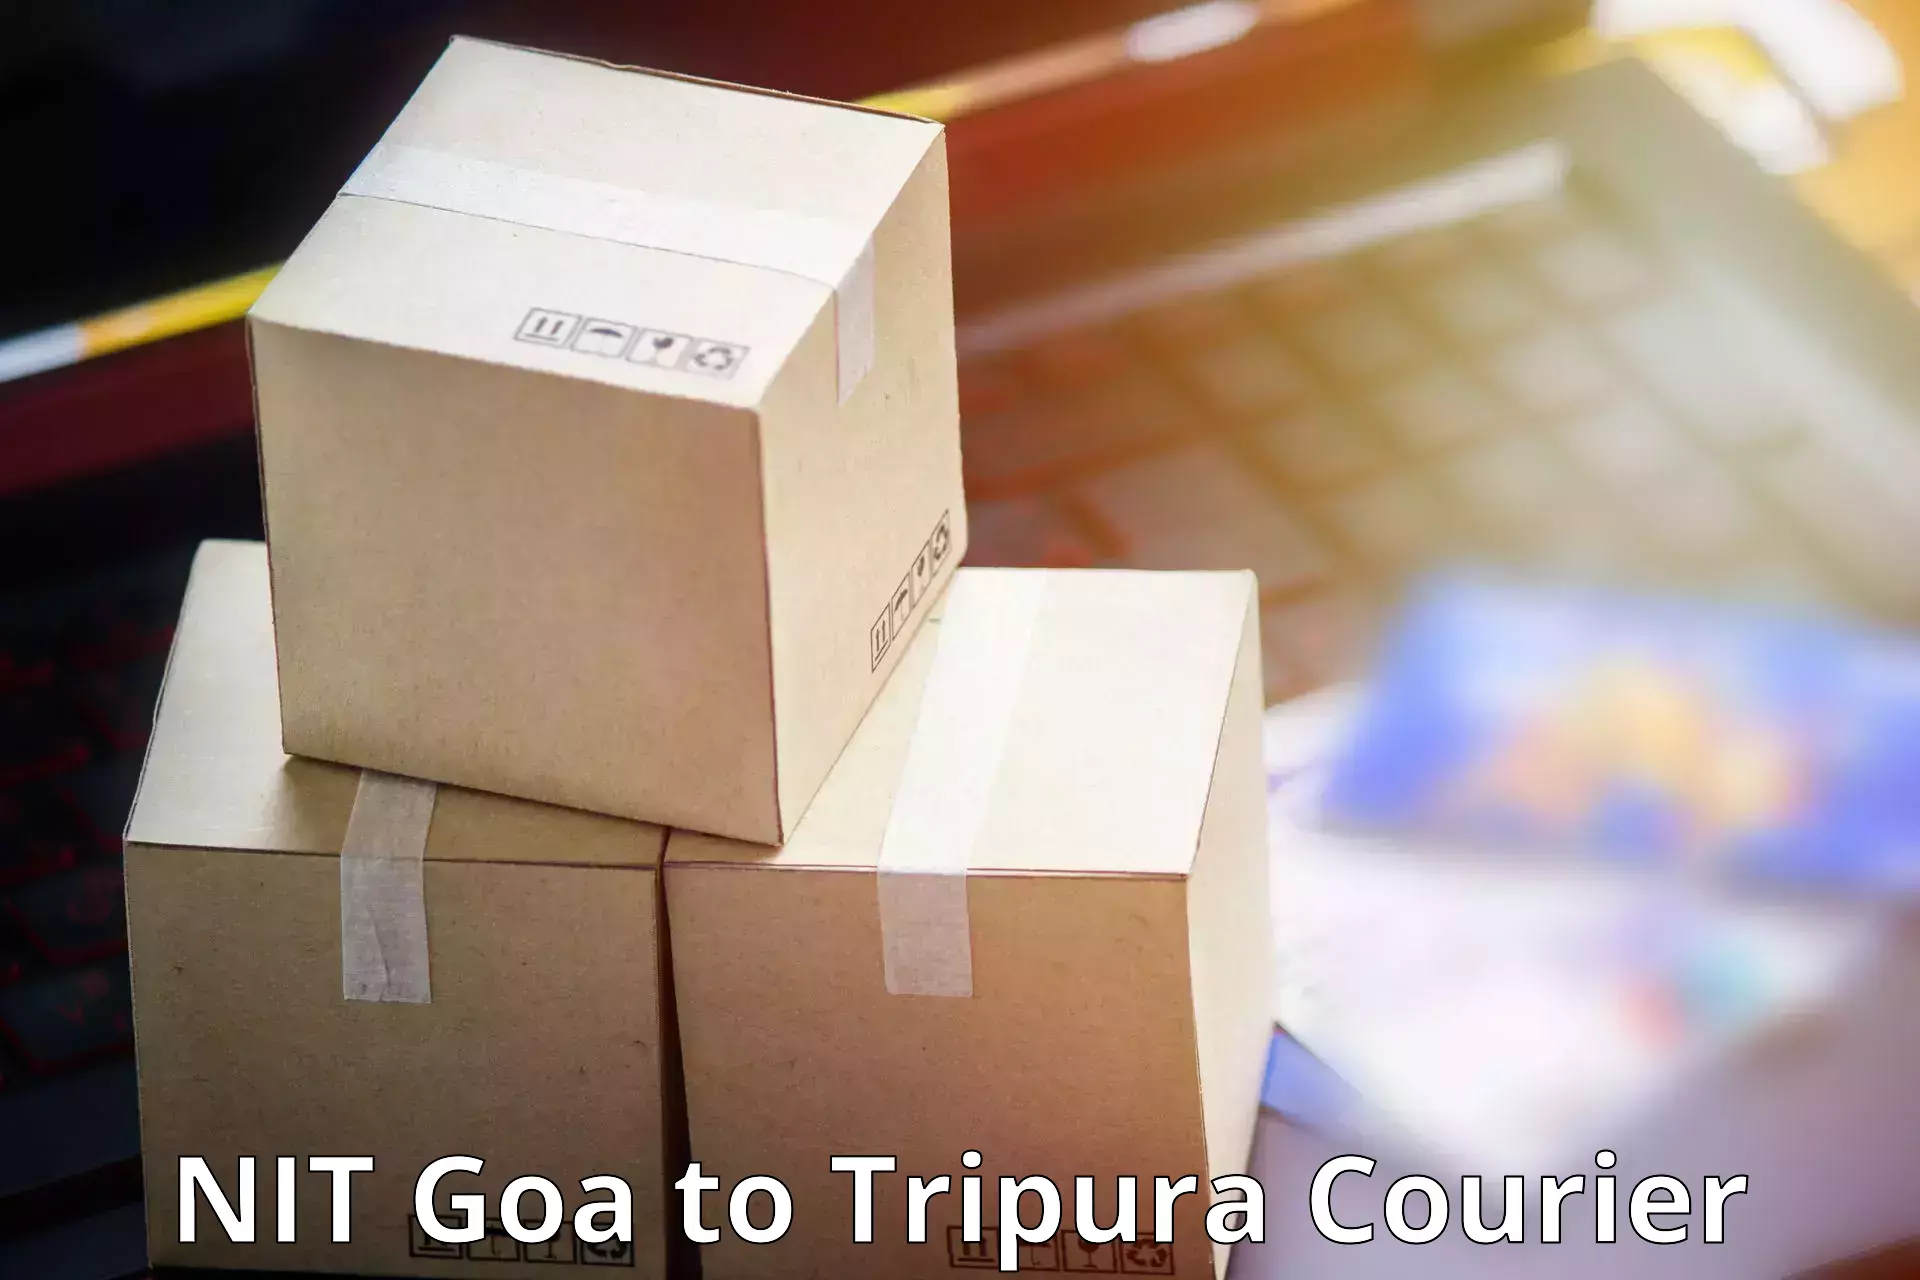 On-call courier service NIT Goa to Tripura